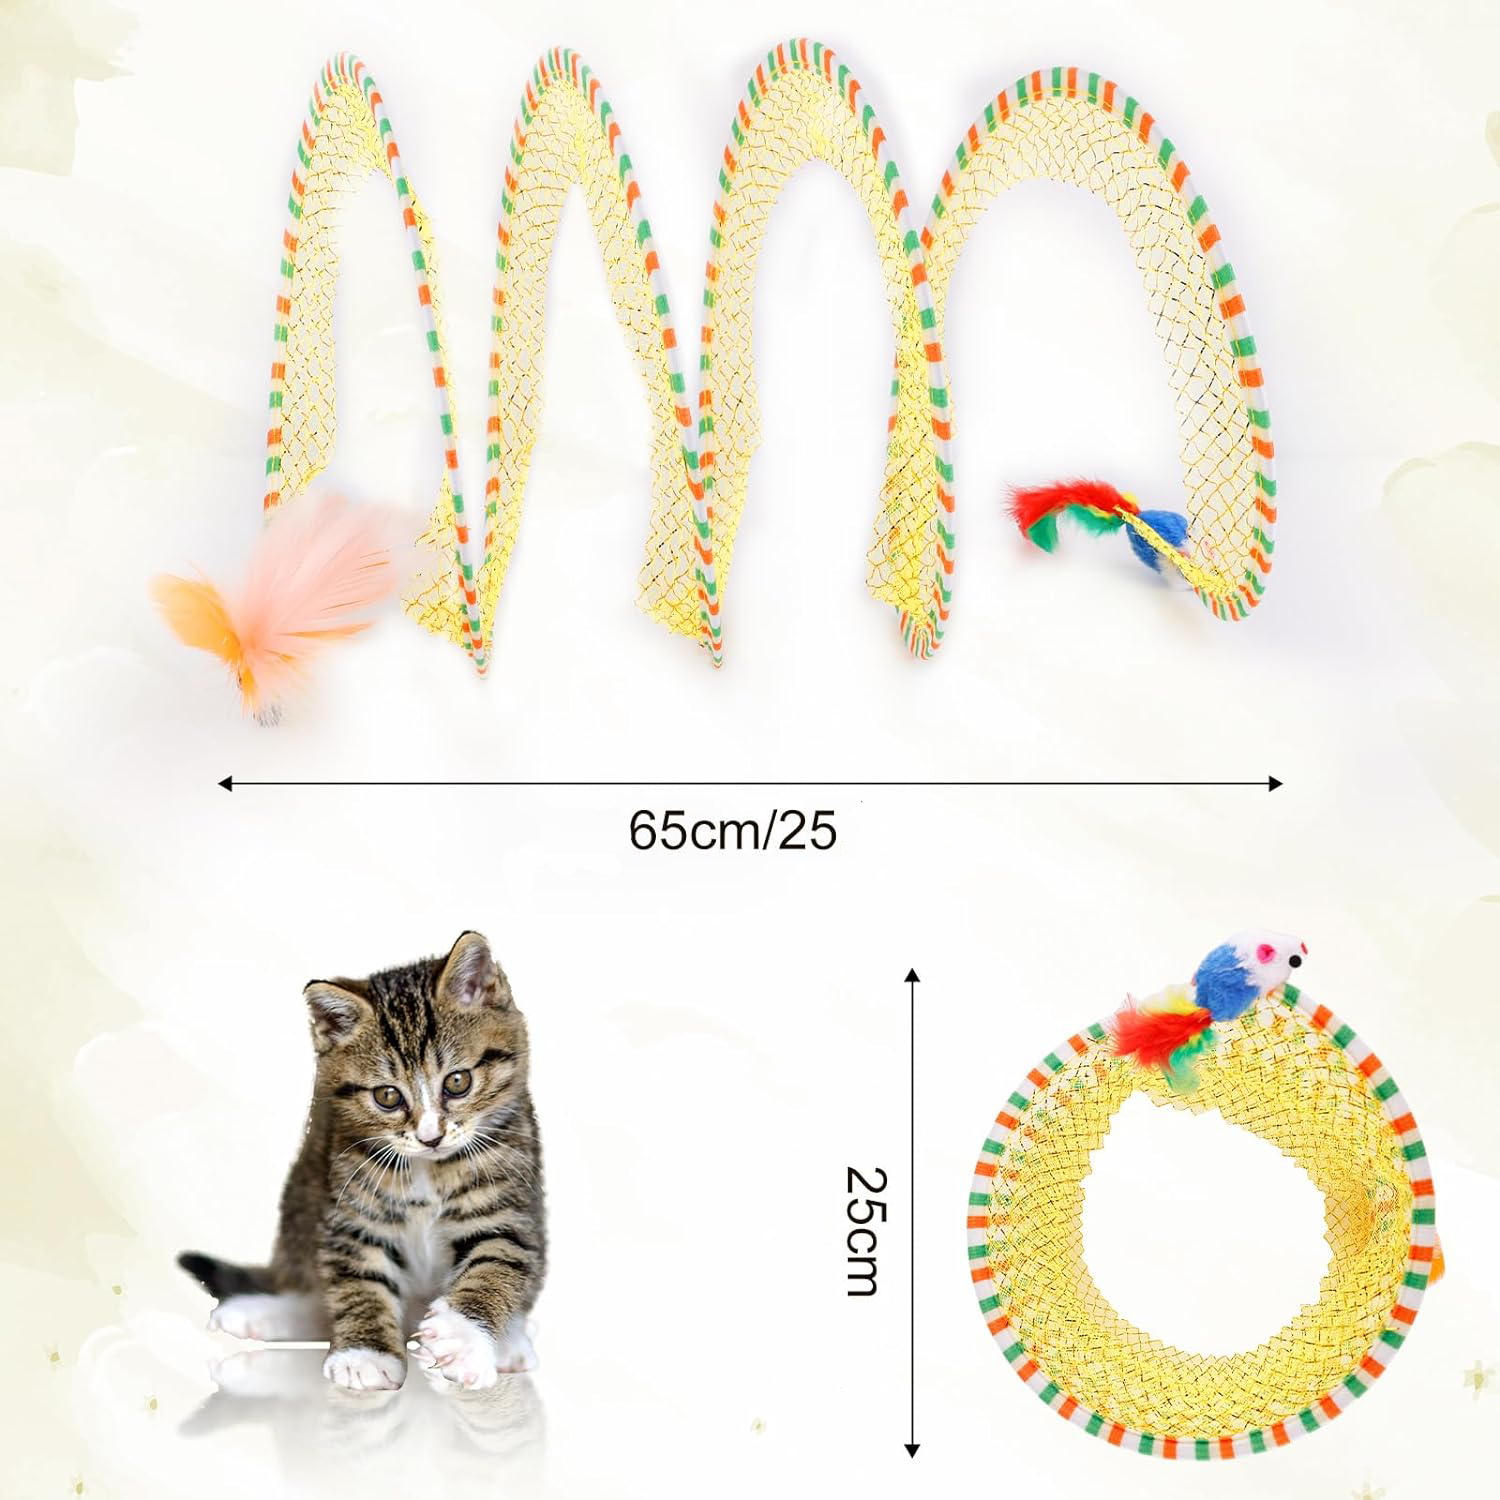 It is a lovely animated image that highlights the product and the playful aspect of cats' activity.